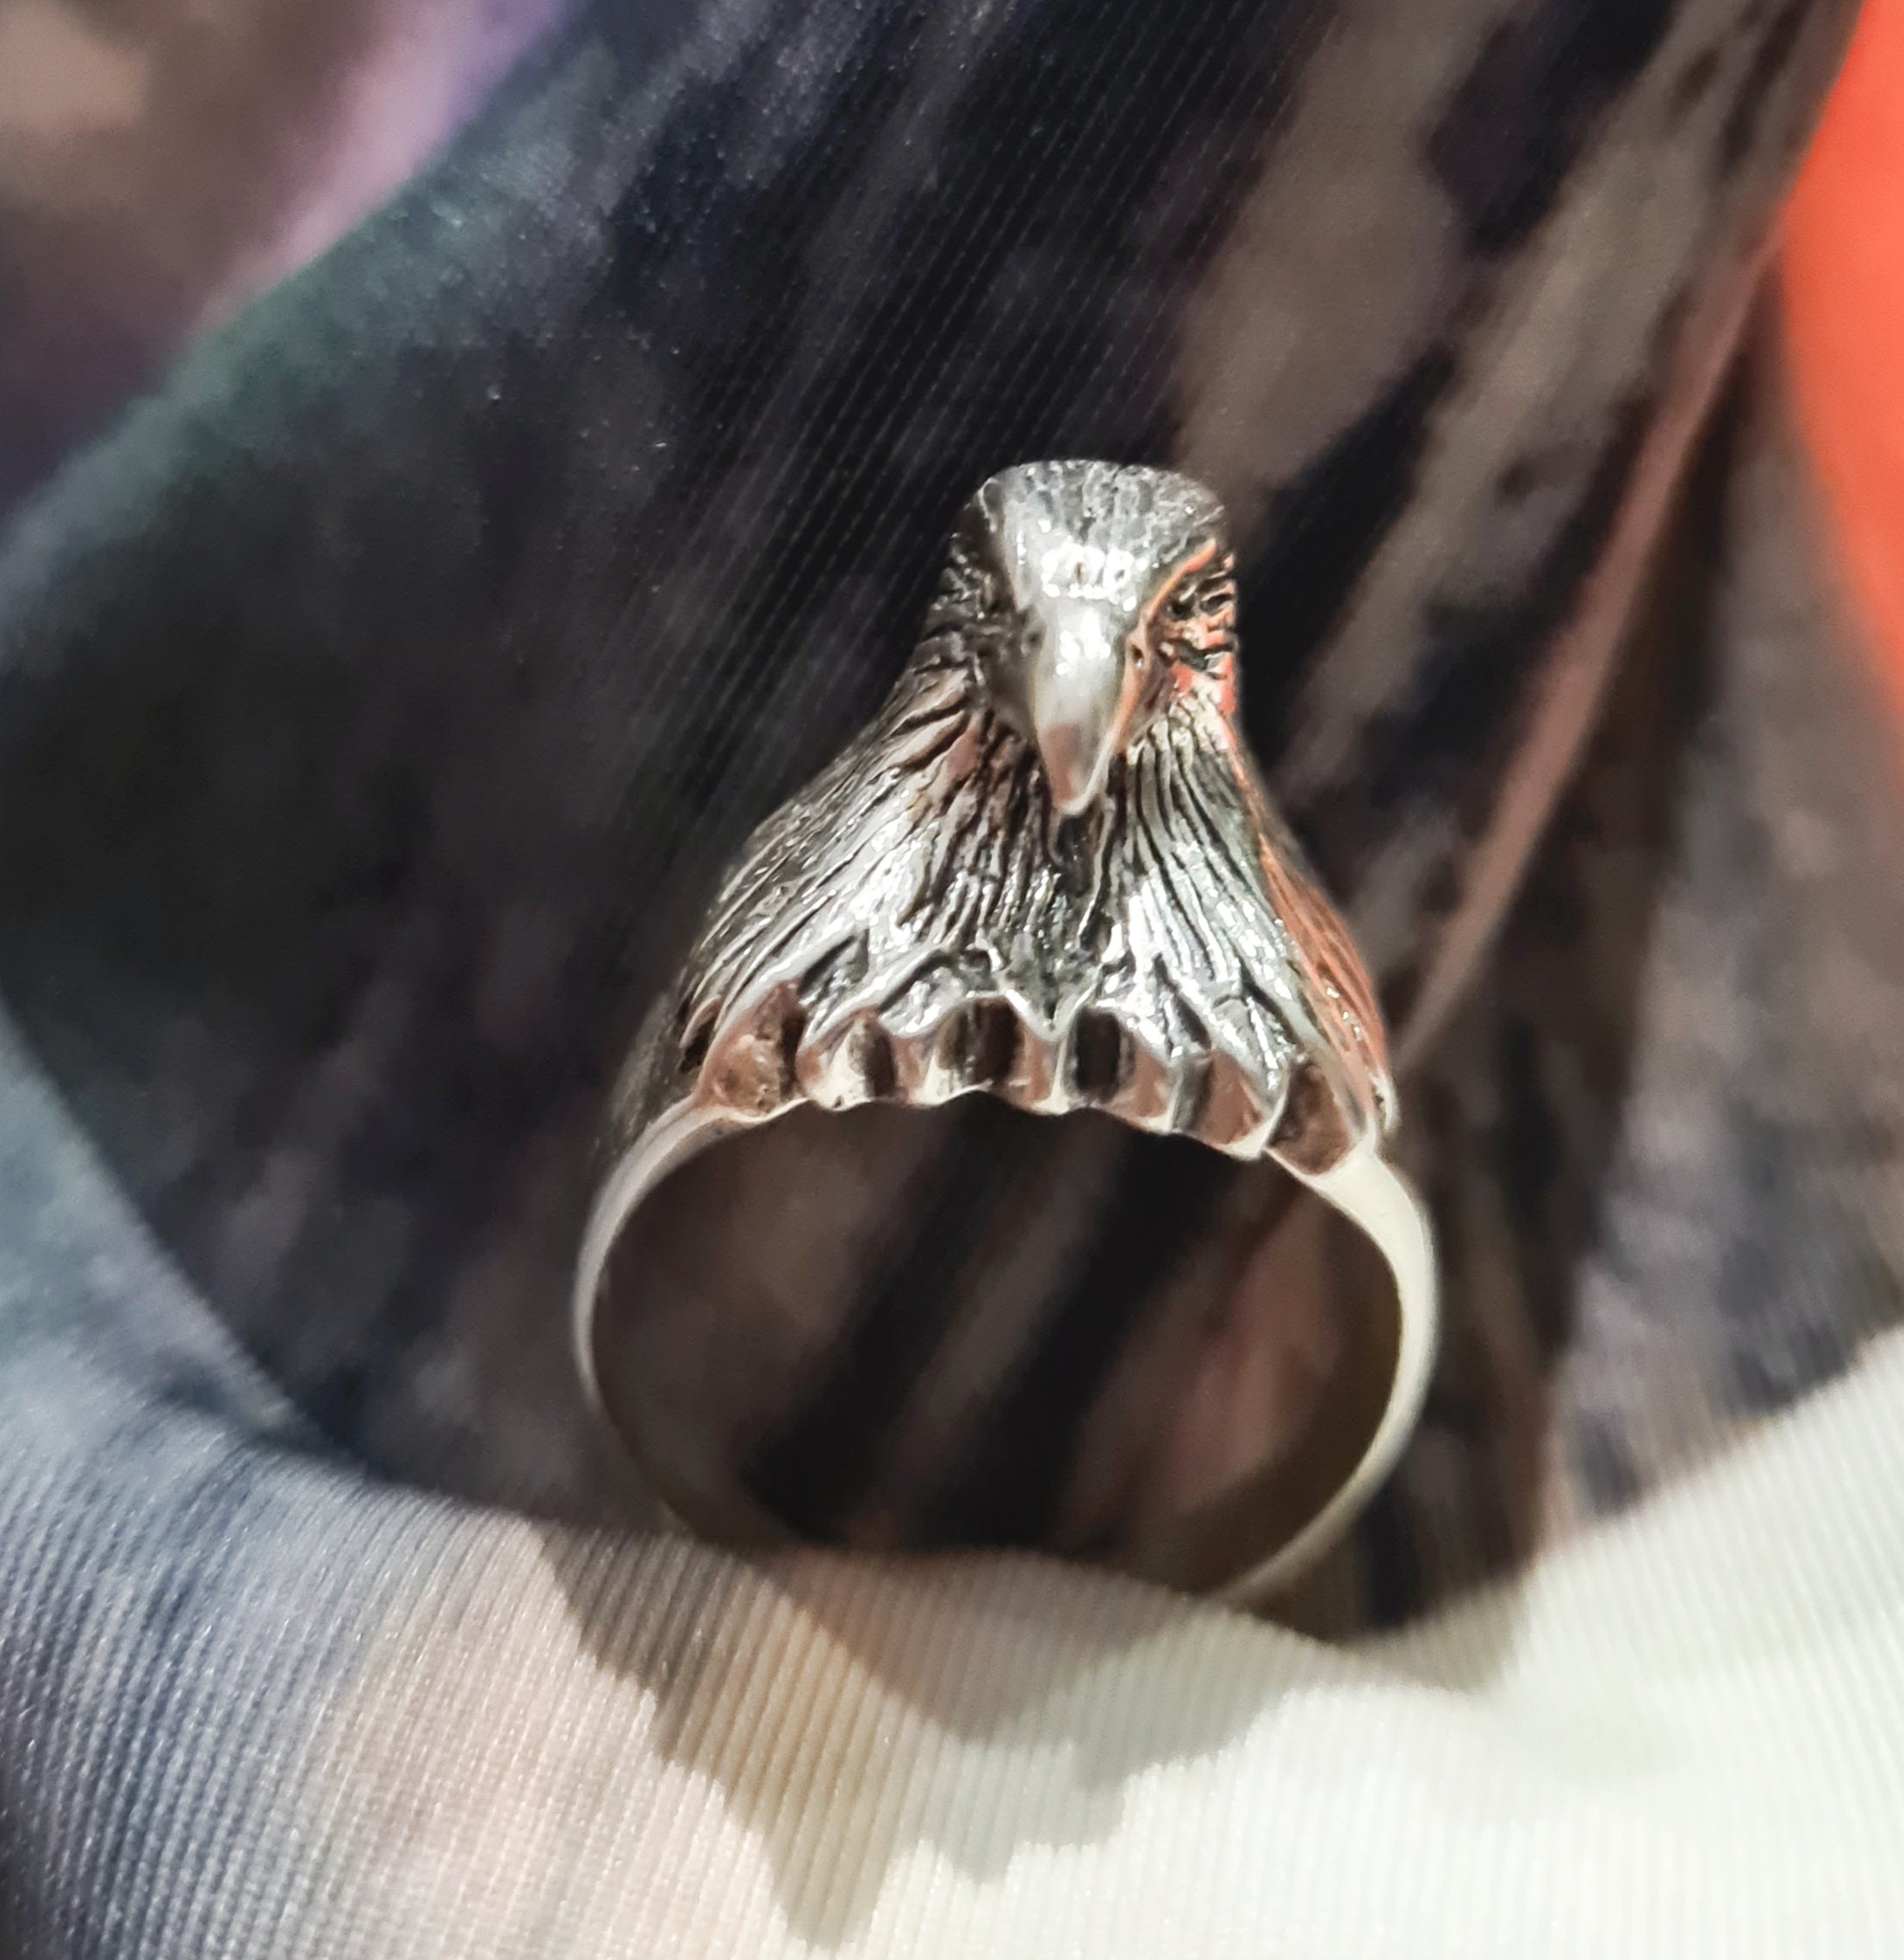 Statement Eagle Ring in Silver, Large Eagle Jewelry, Unisex Animal Jewelry,  Handmade Silver Jewelry, Adjustable Men's Ring, Halloween Ring - Etsy